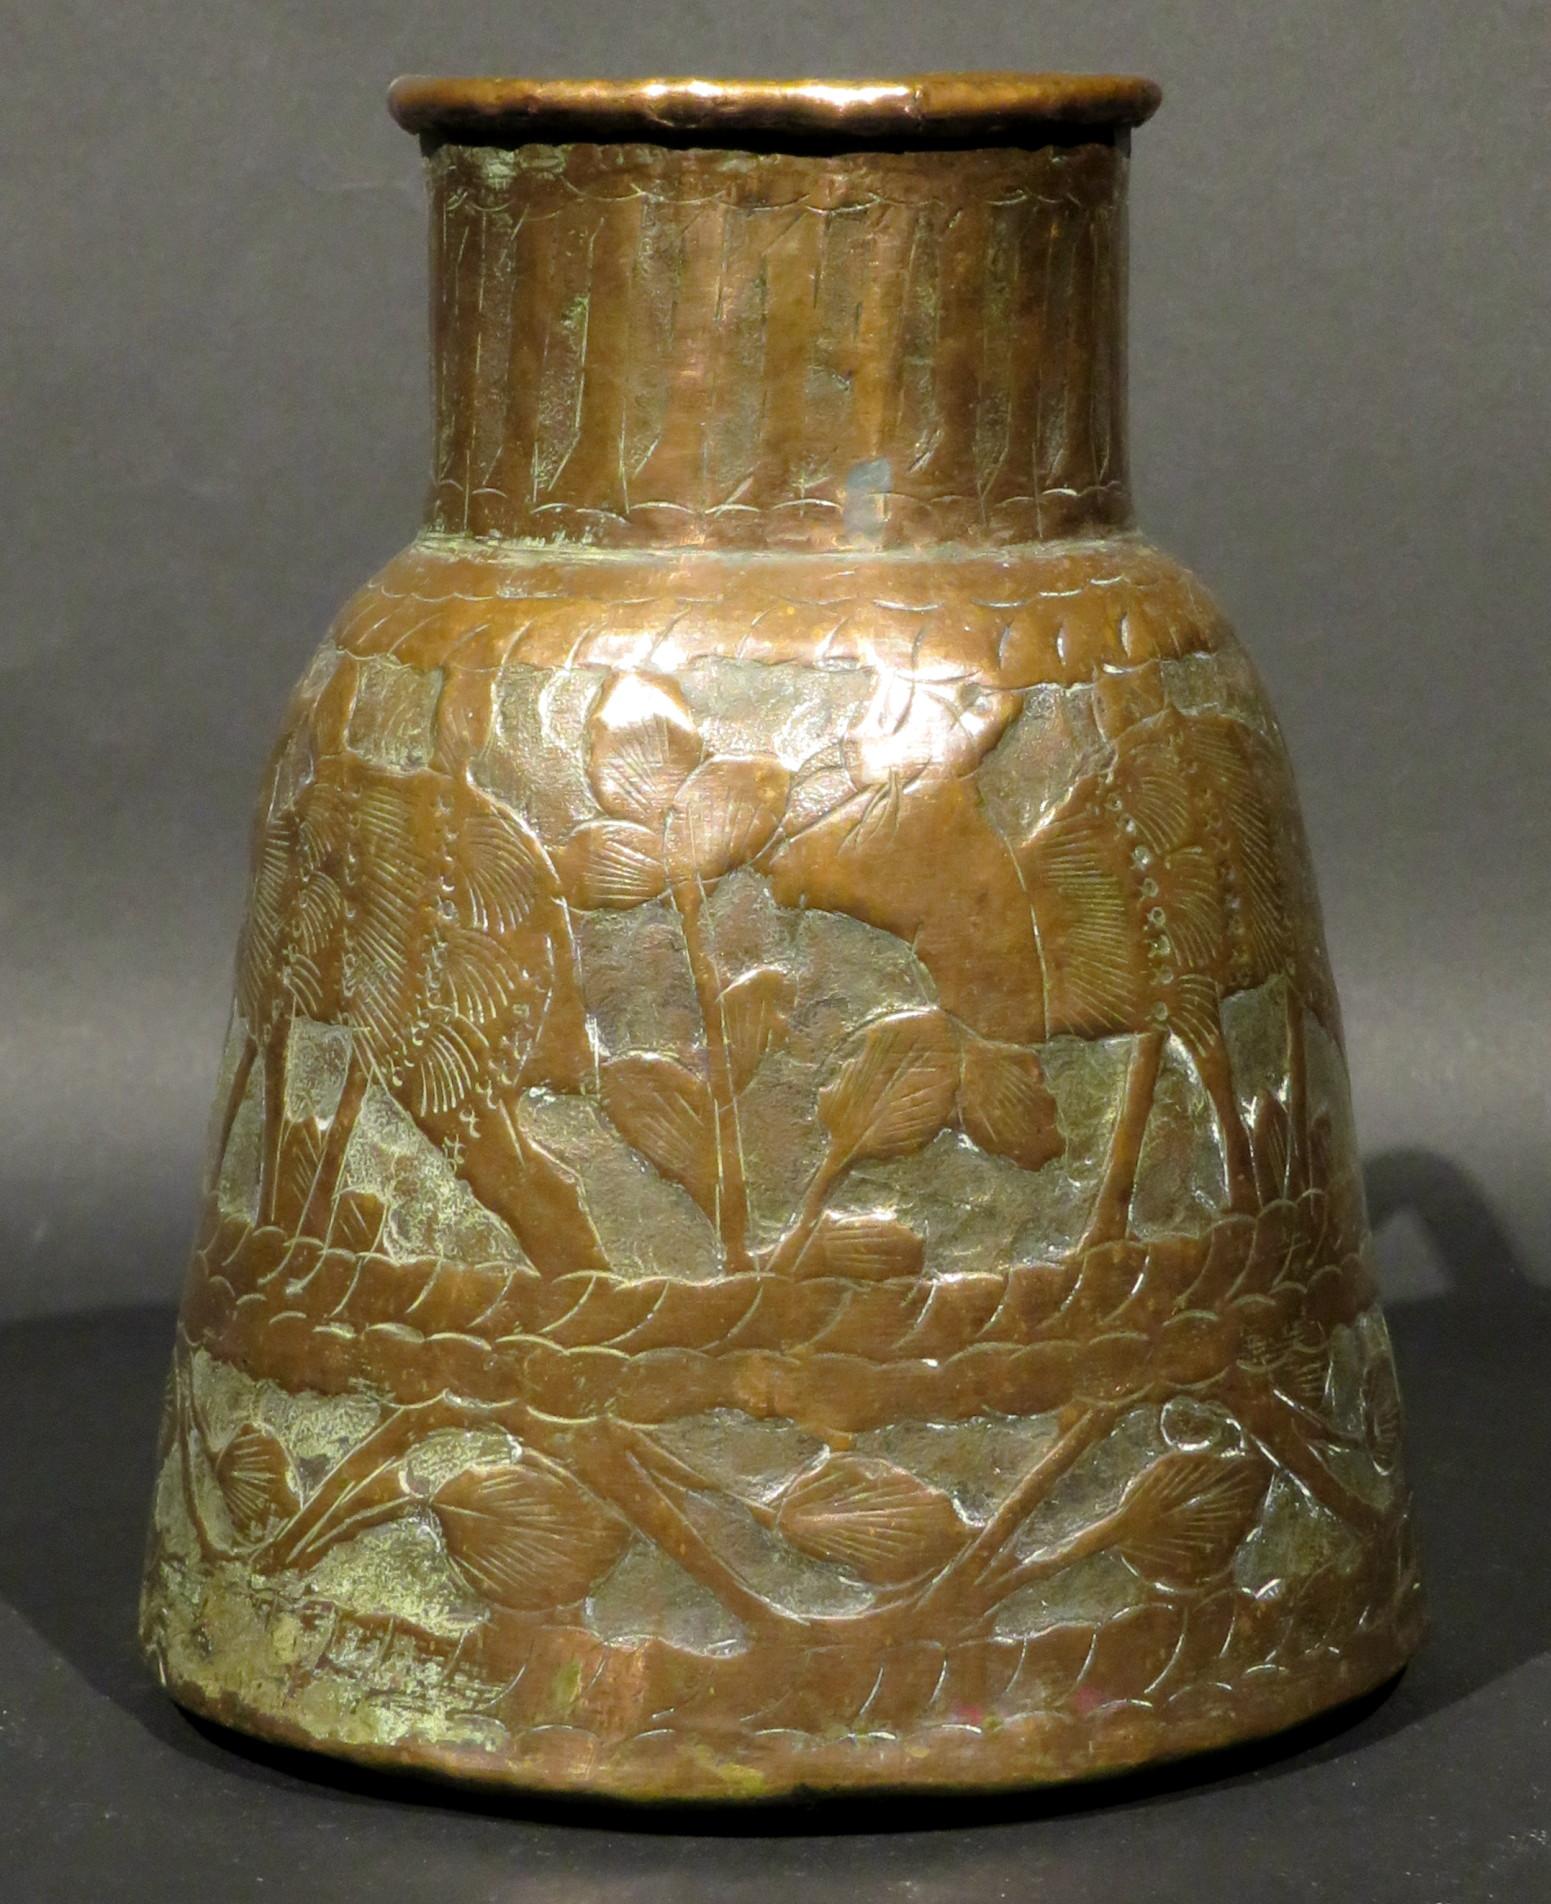 The conical shaped body rising to a collared neck and affixed with an applied brass handle, the exterior decorated overall with embossed motifs of deer, peacocks & foliage, the underside showing an old dovetail seamed construction.
